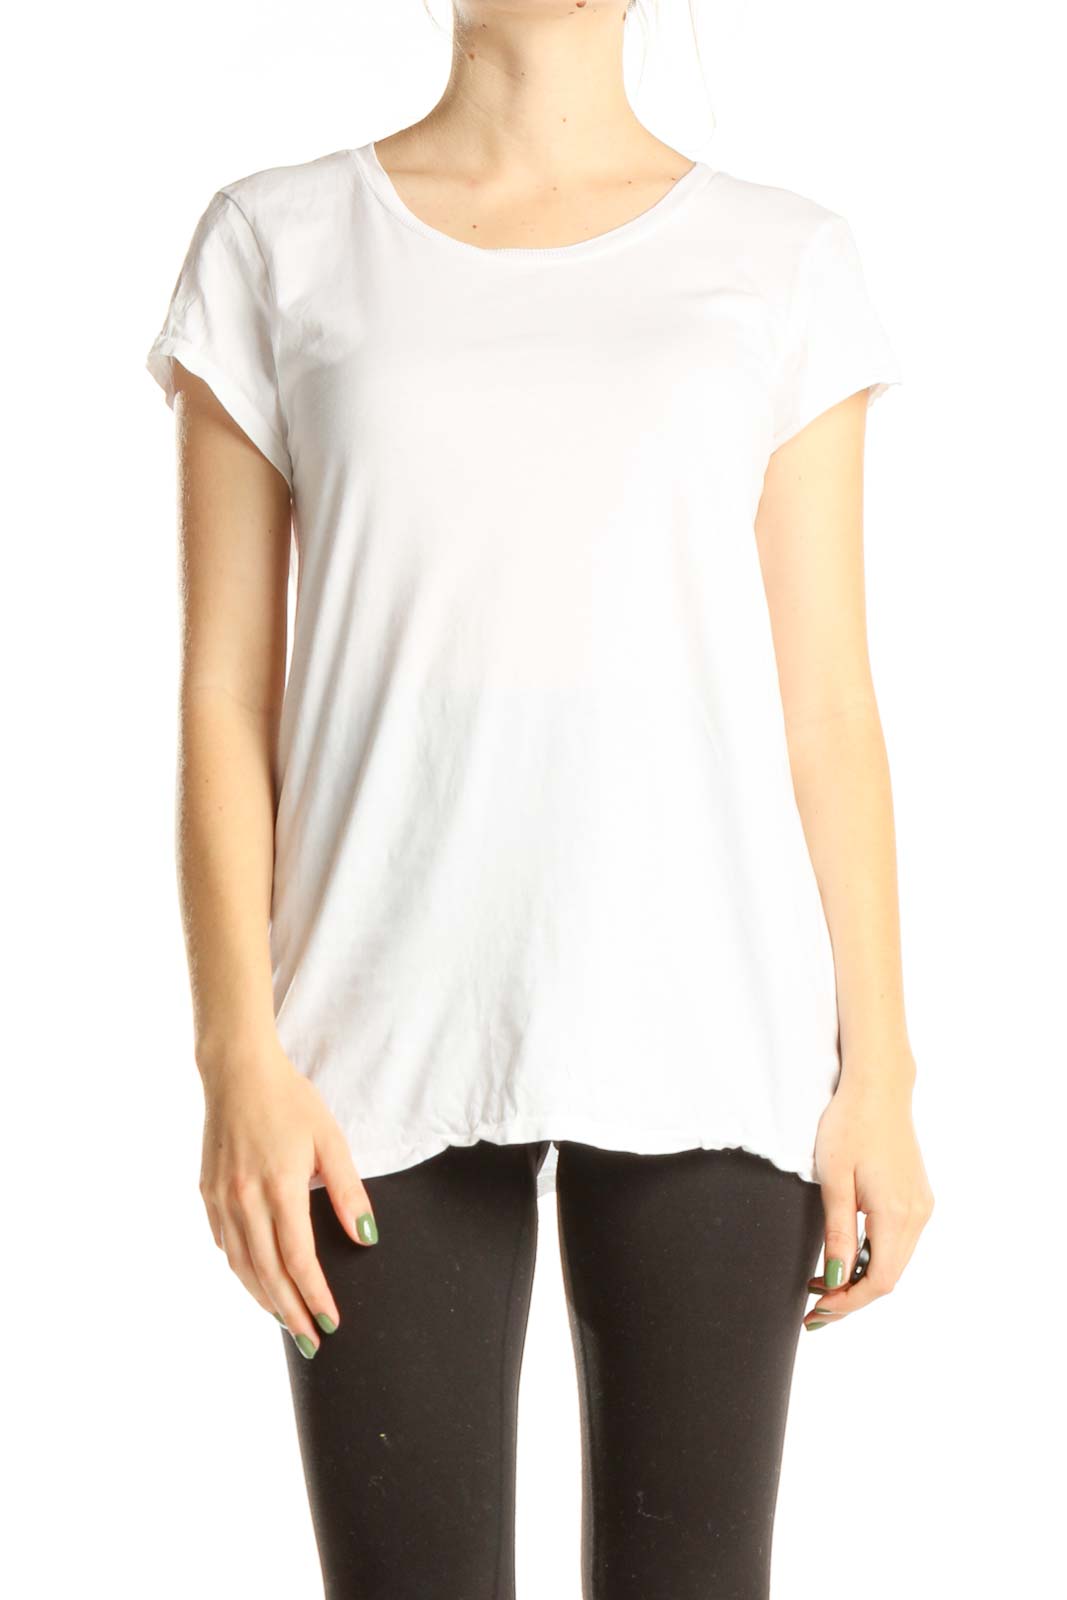 White Casual T-Shirt Front